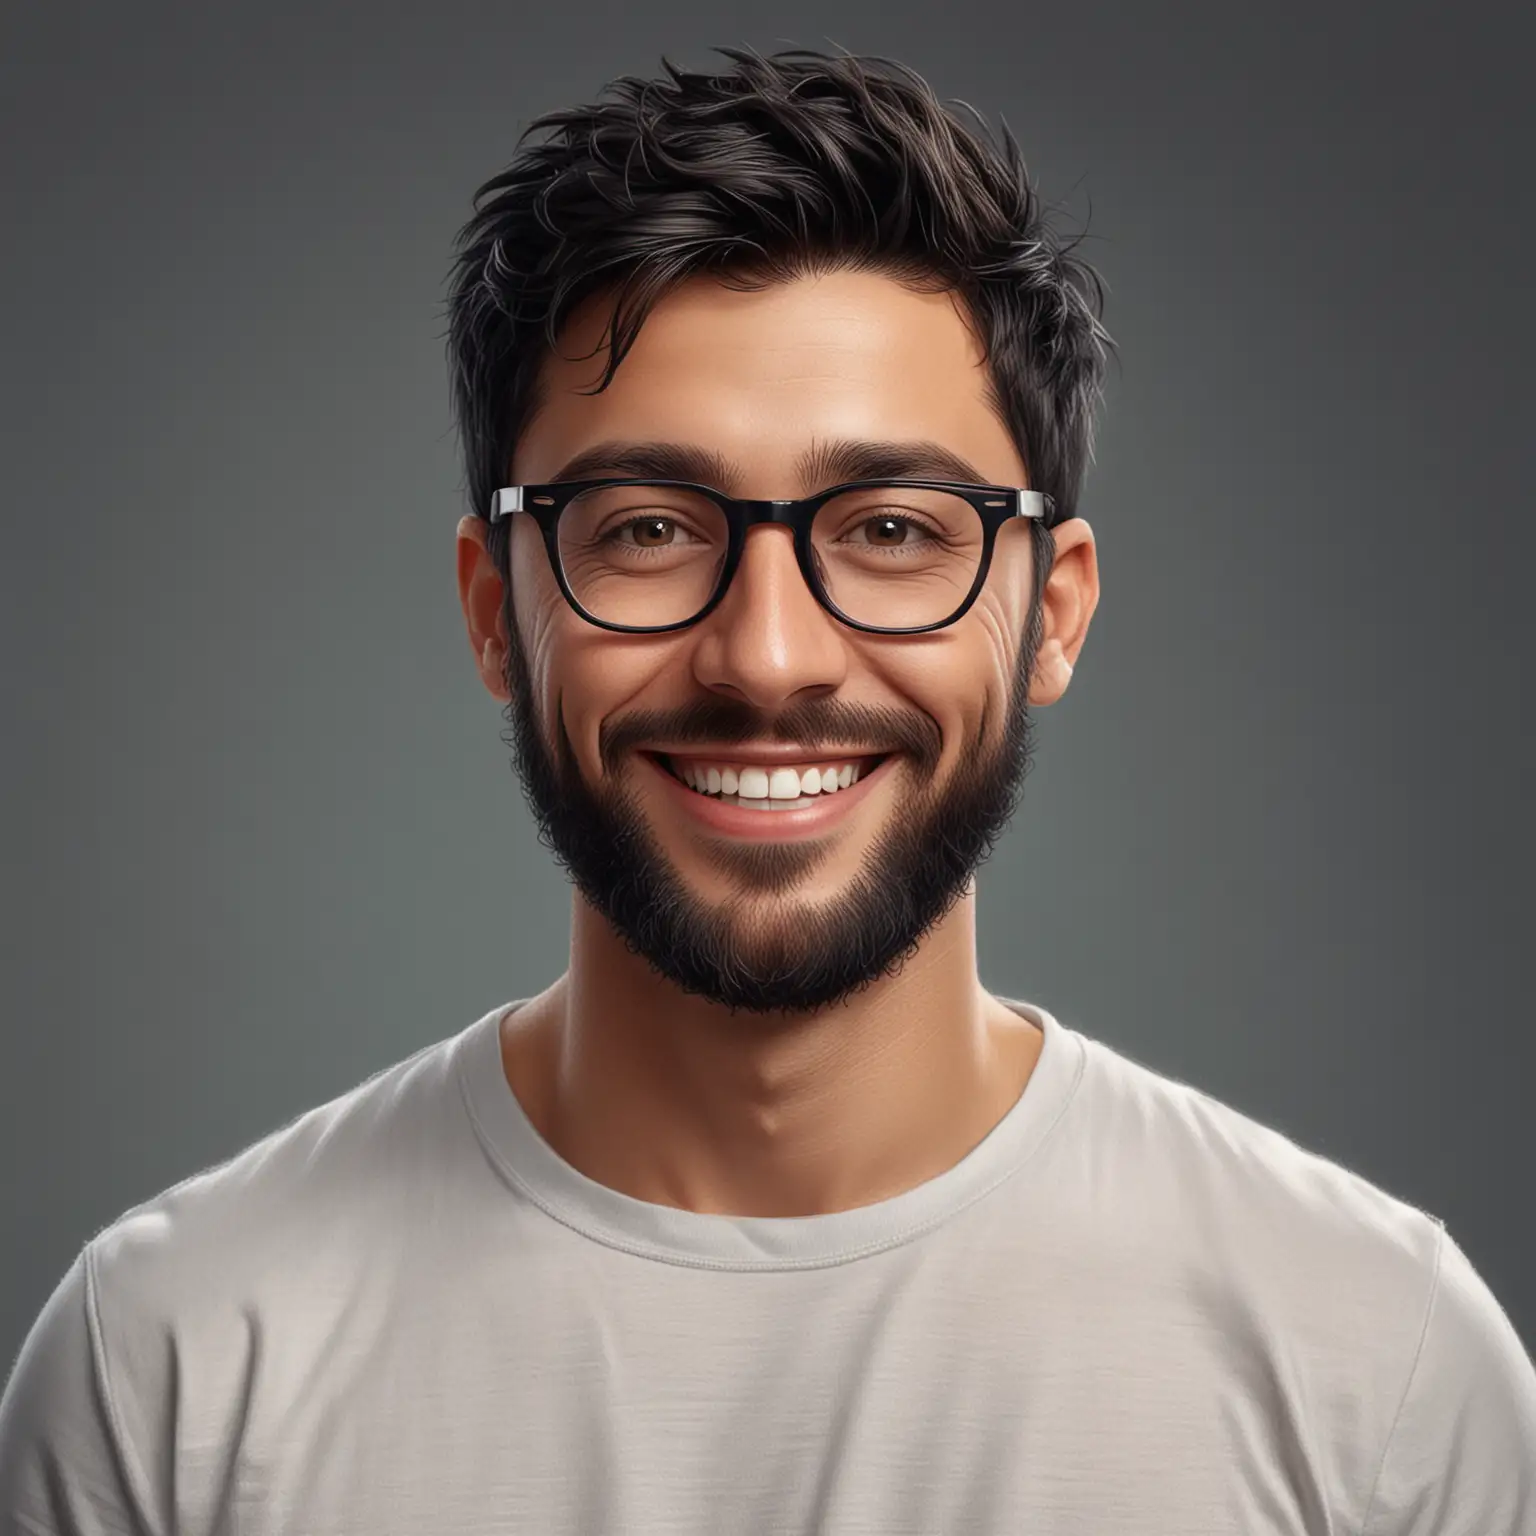 Smiling-Man-with-Glasses-and-Beard-Realistic-Portrait